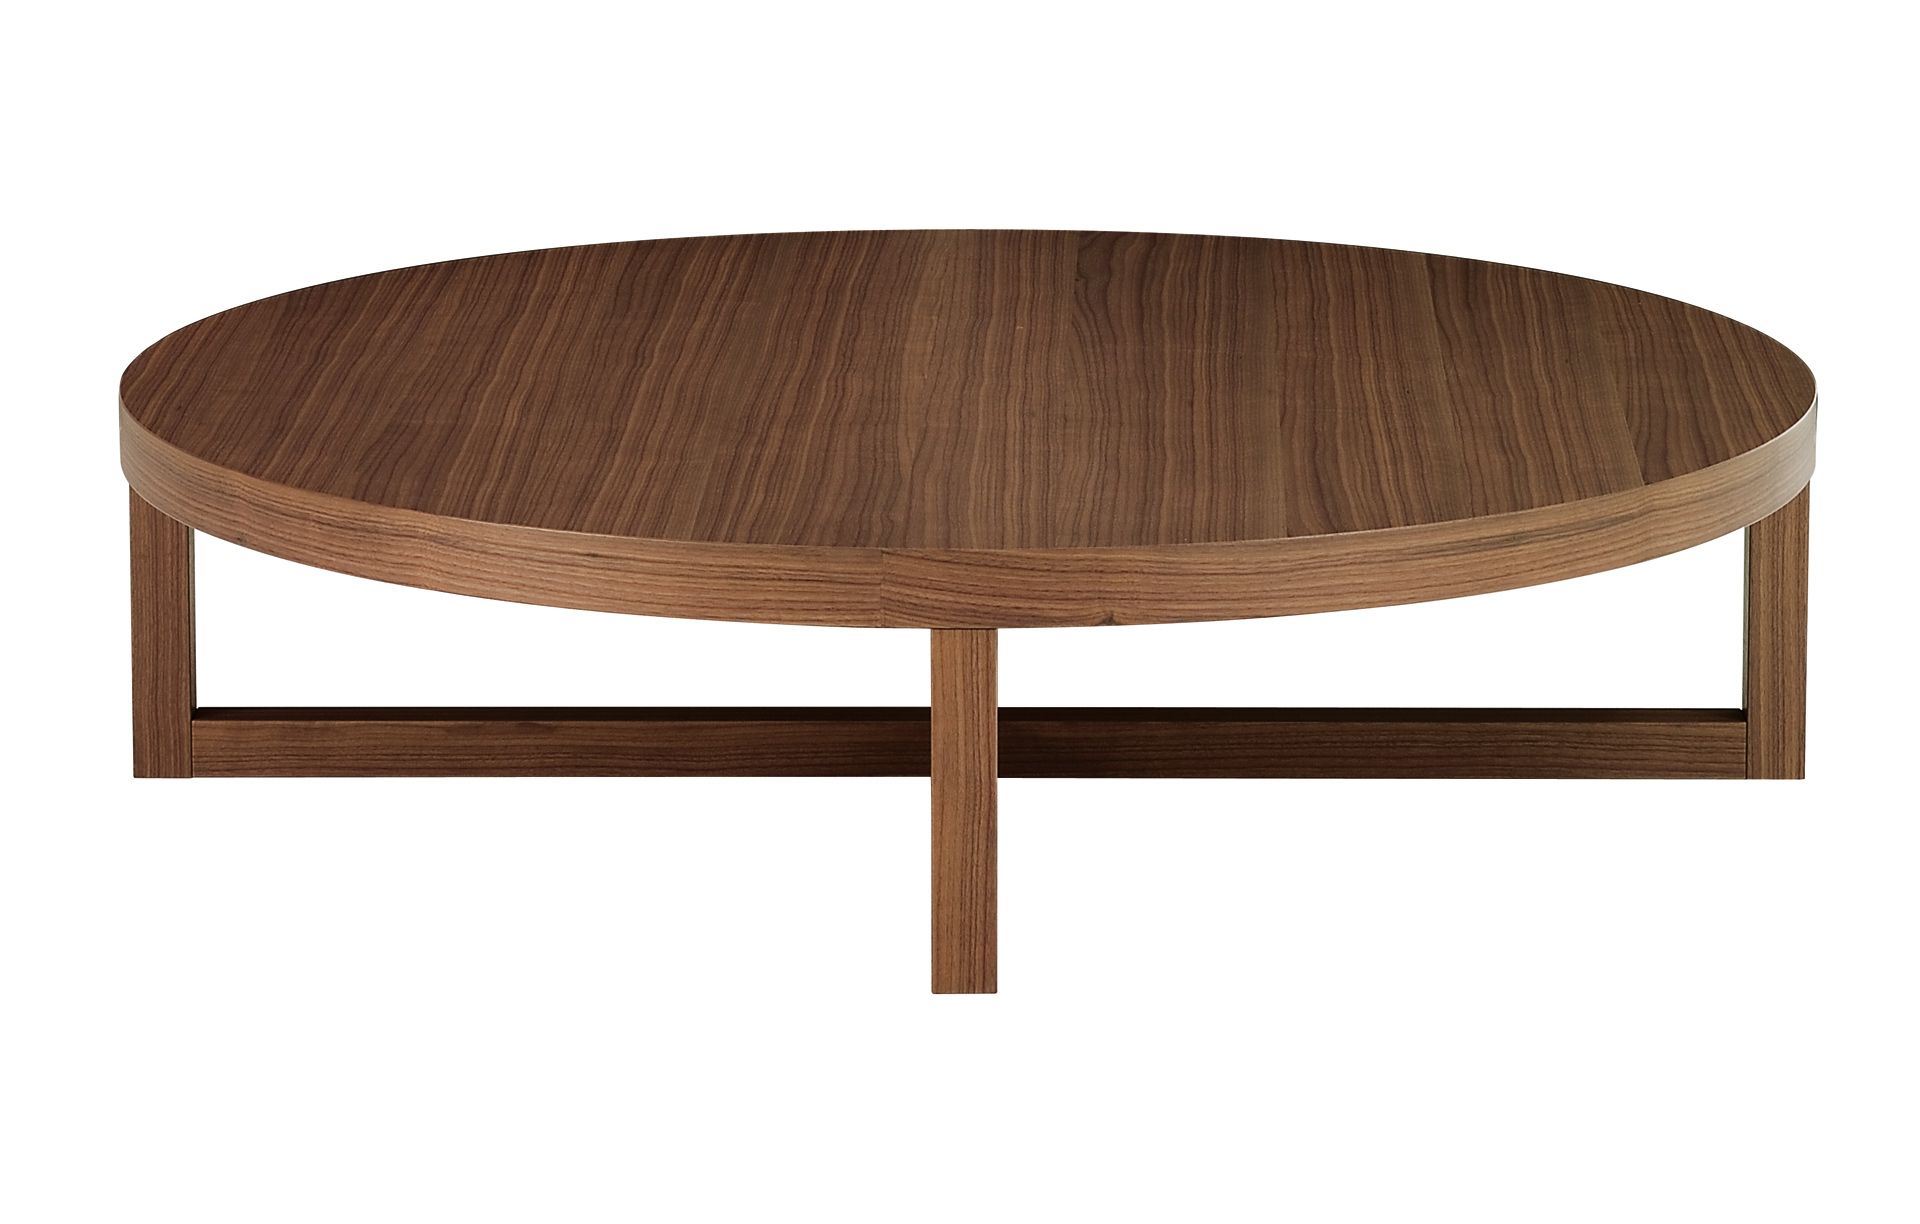 Round Low Coffee Table Round Brown Simple Laminated Wooden Coffee Table Small Round Coffee Tables (View 8 of 10)